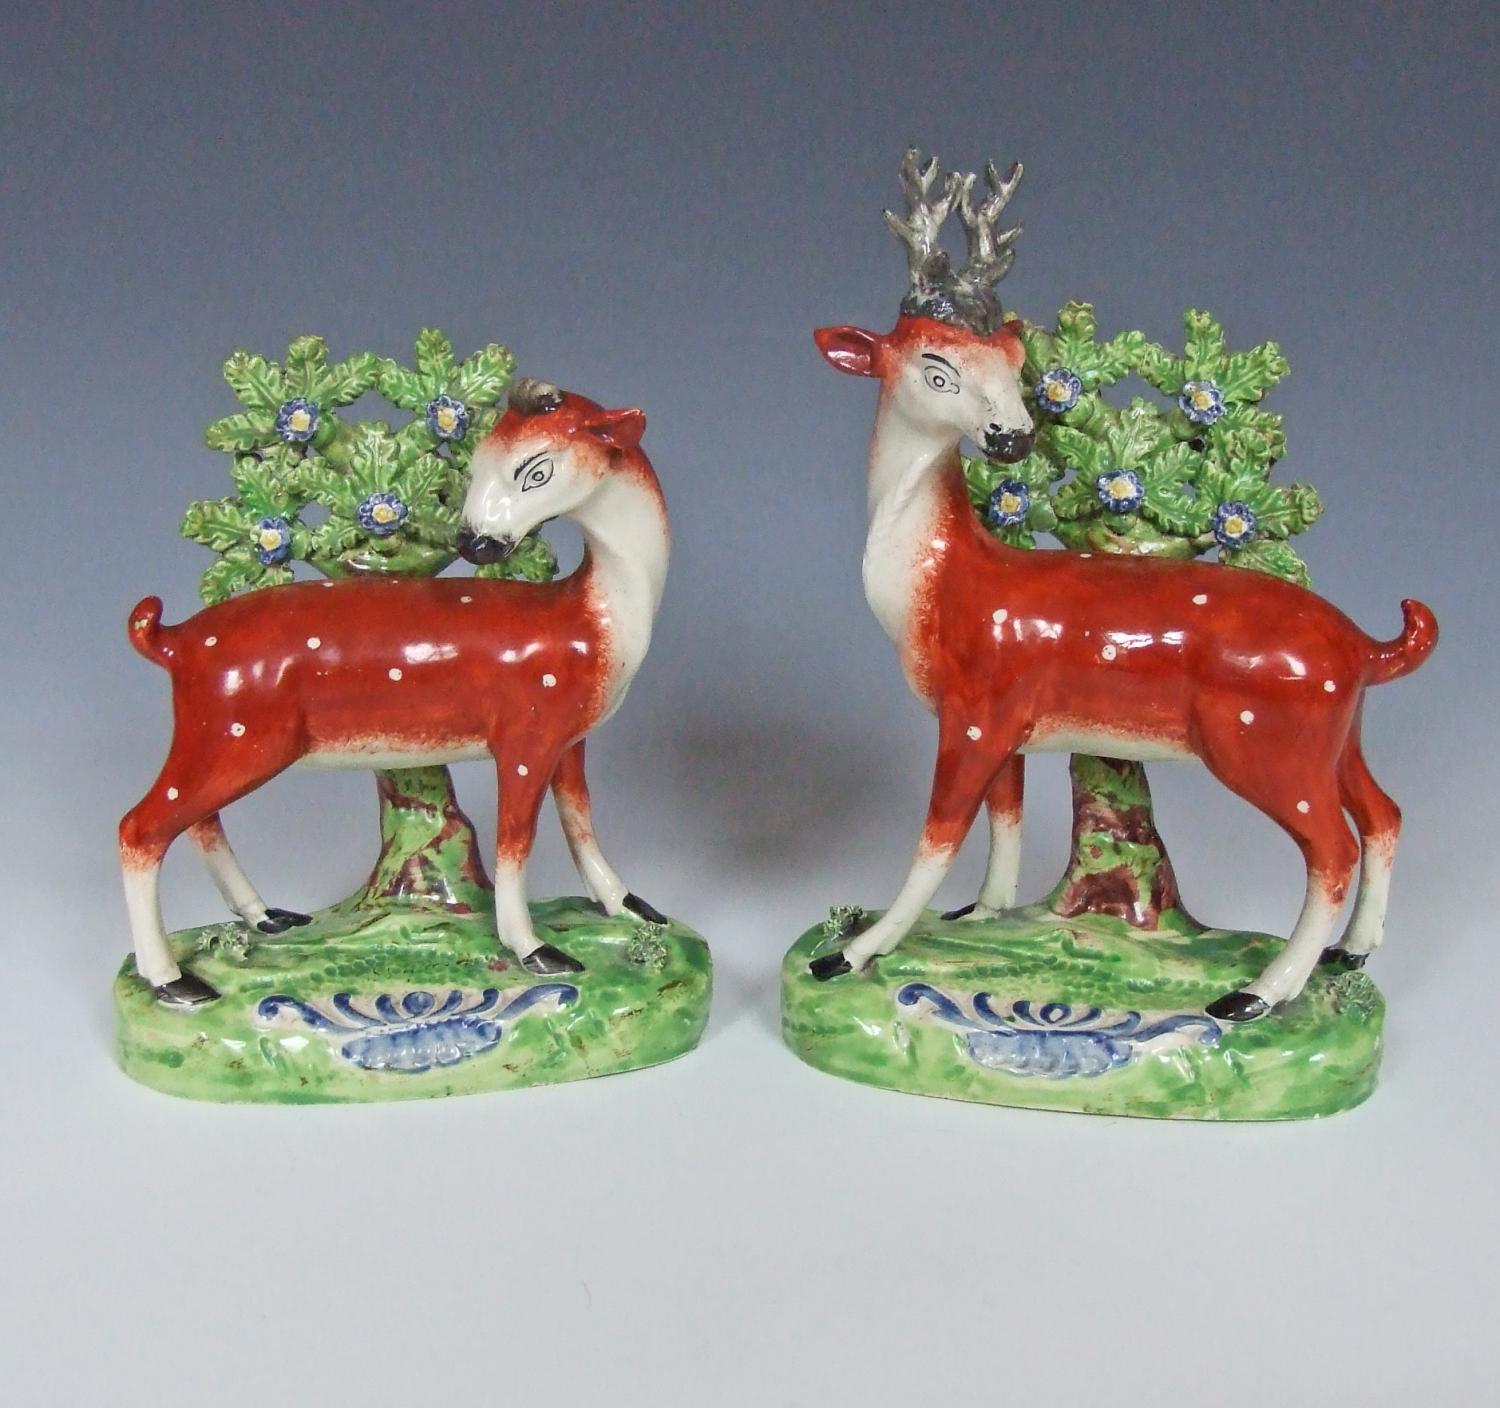 Early Staffordshire stag figures